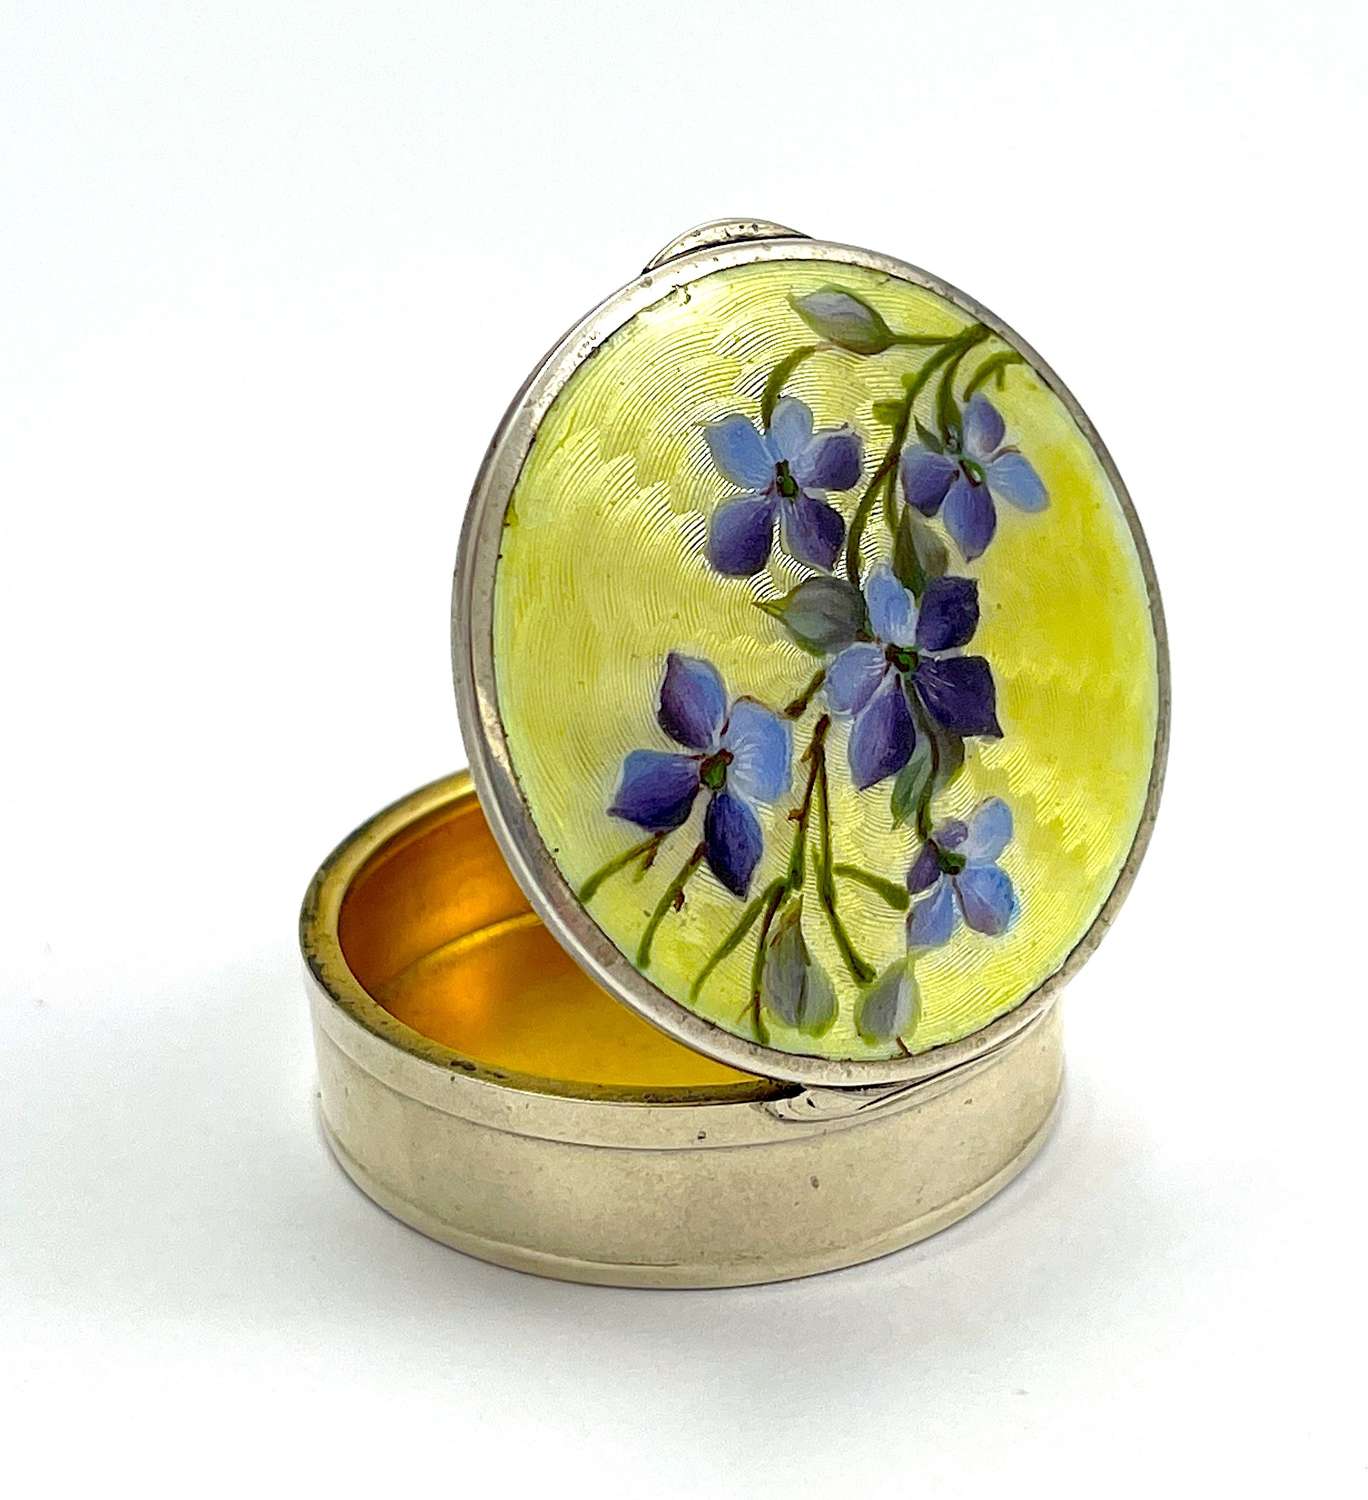 Antique Yellow Guilloche Enamel Pill Box Decorated with Violets